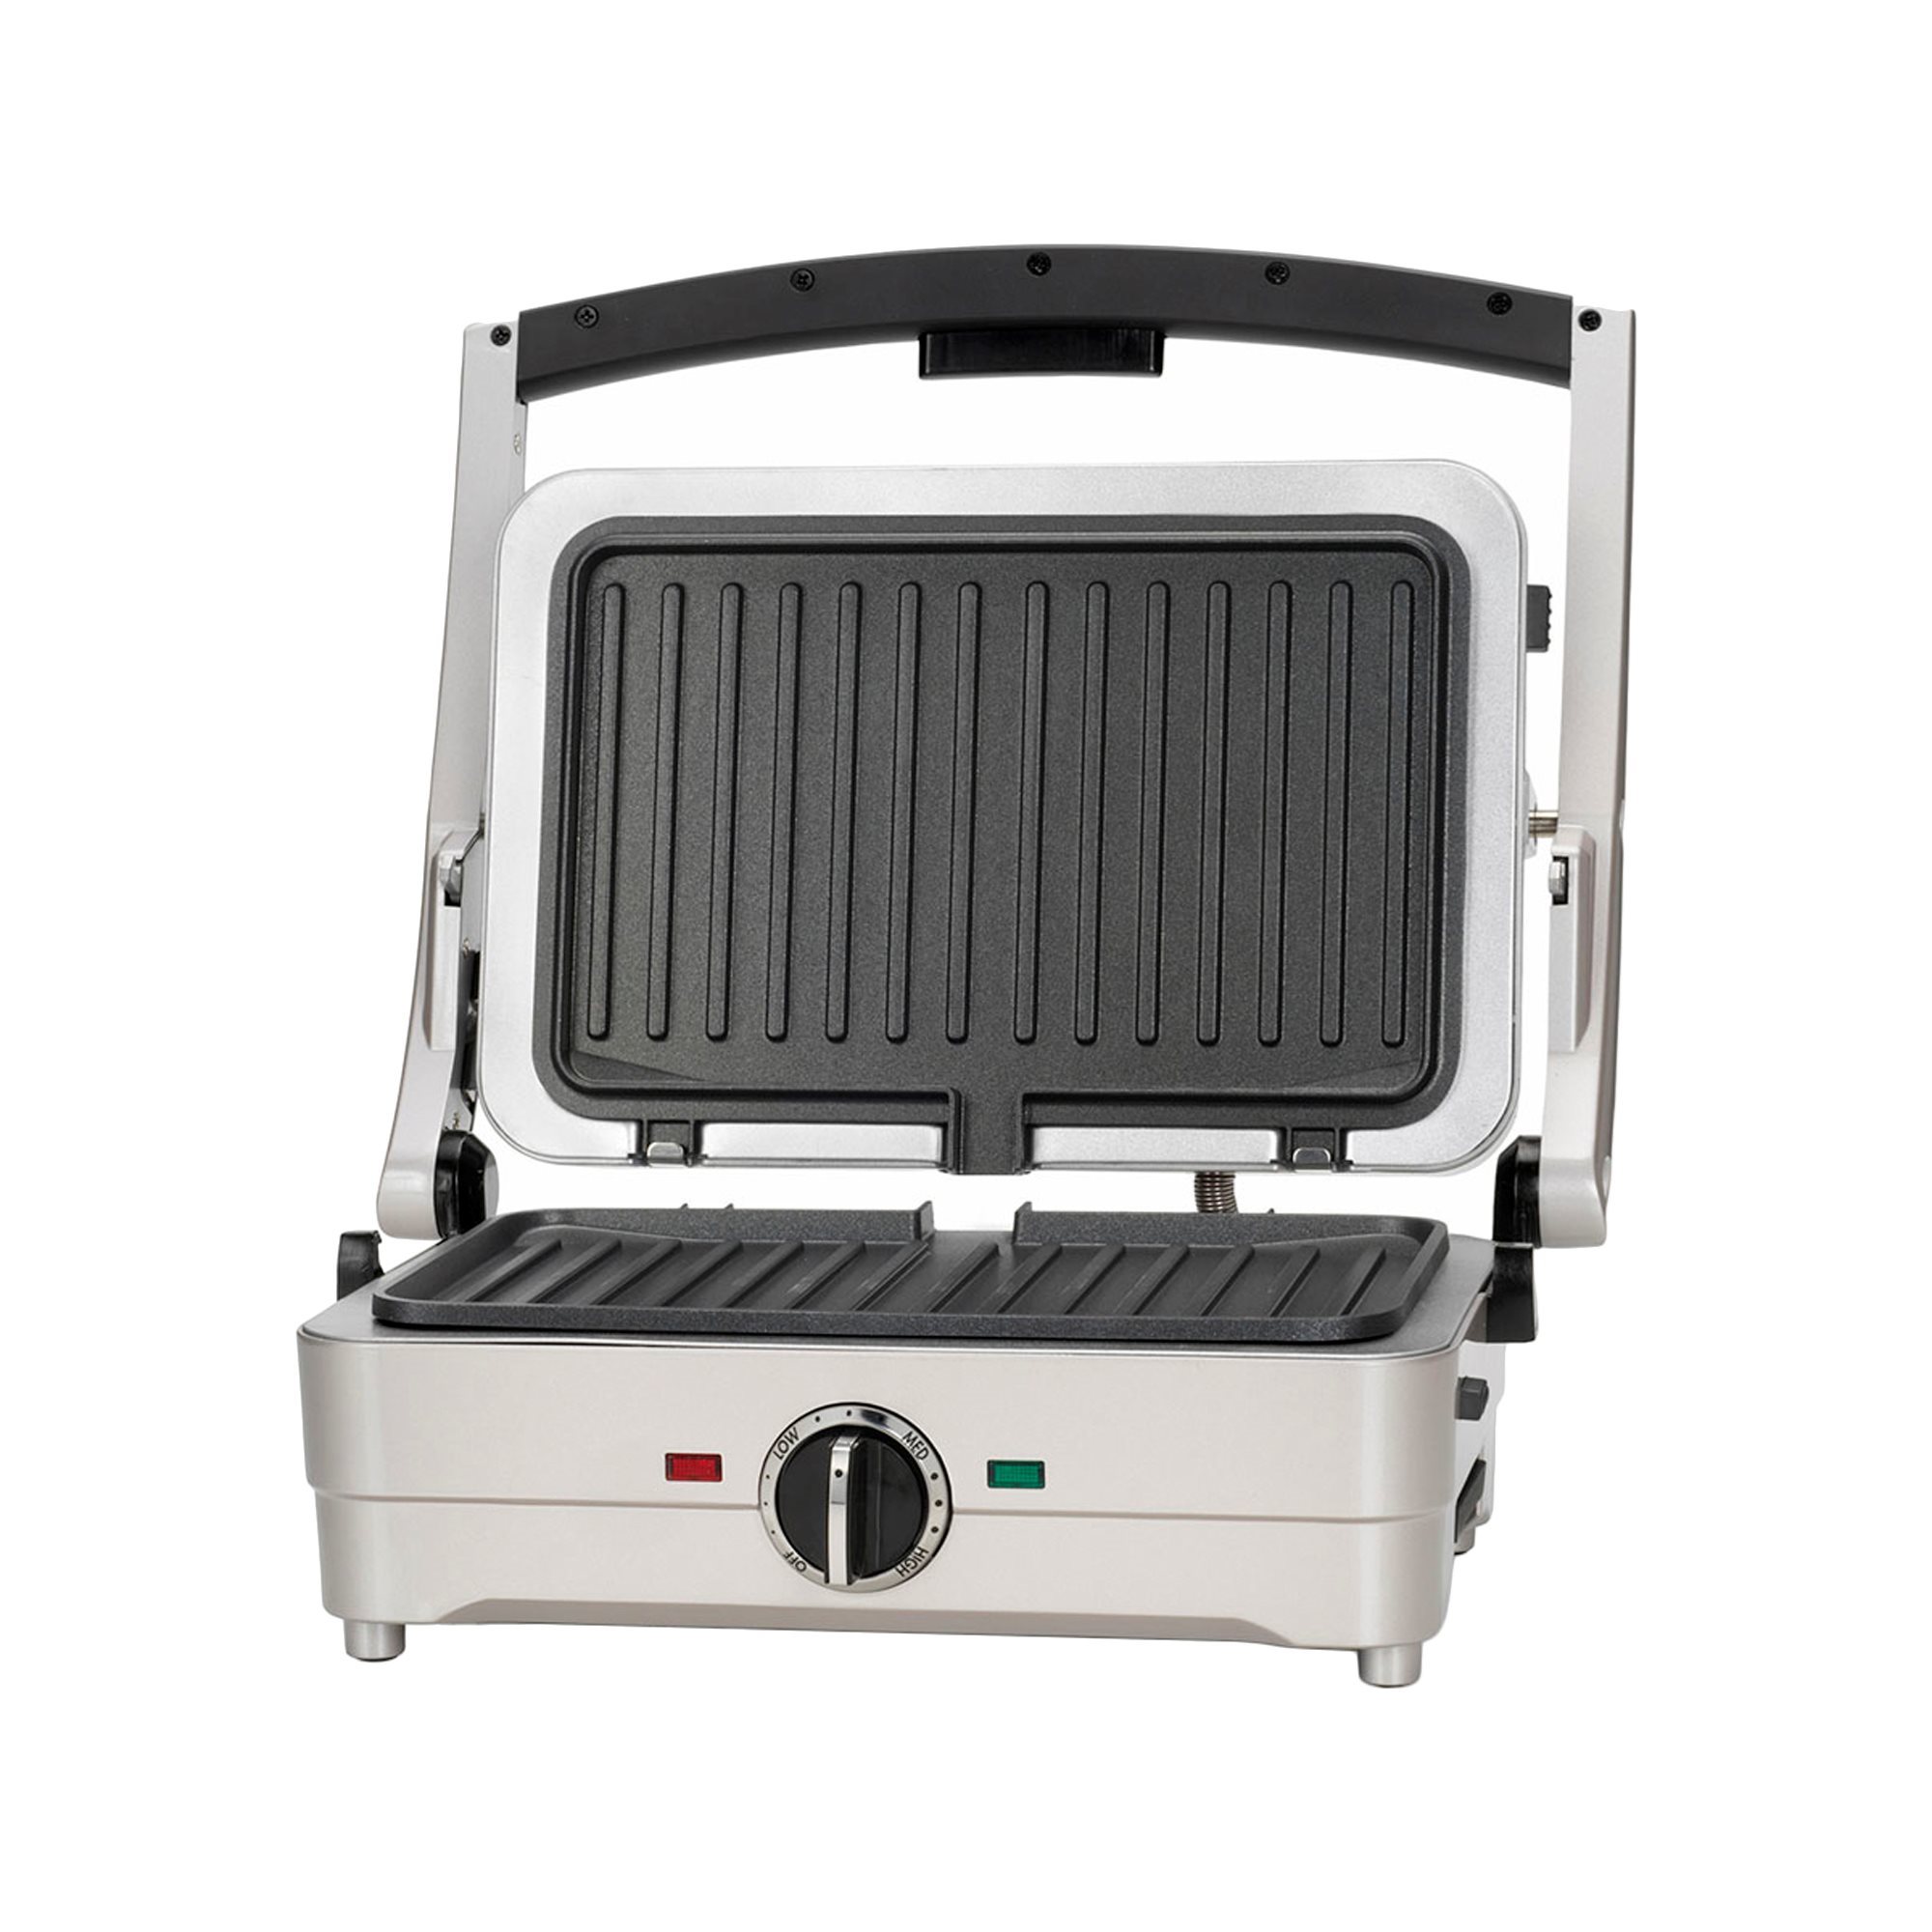 Cuisinart 2-in-1 Electric Grill